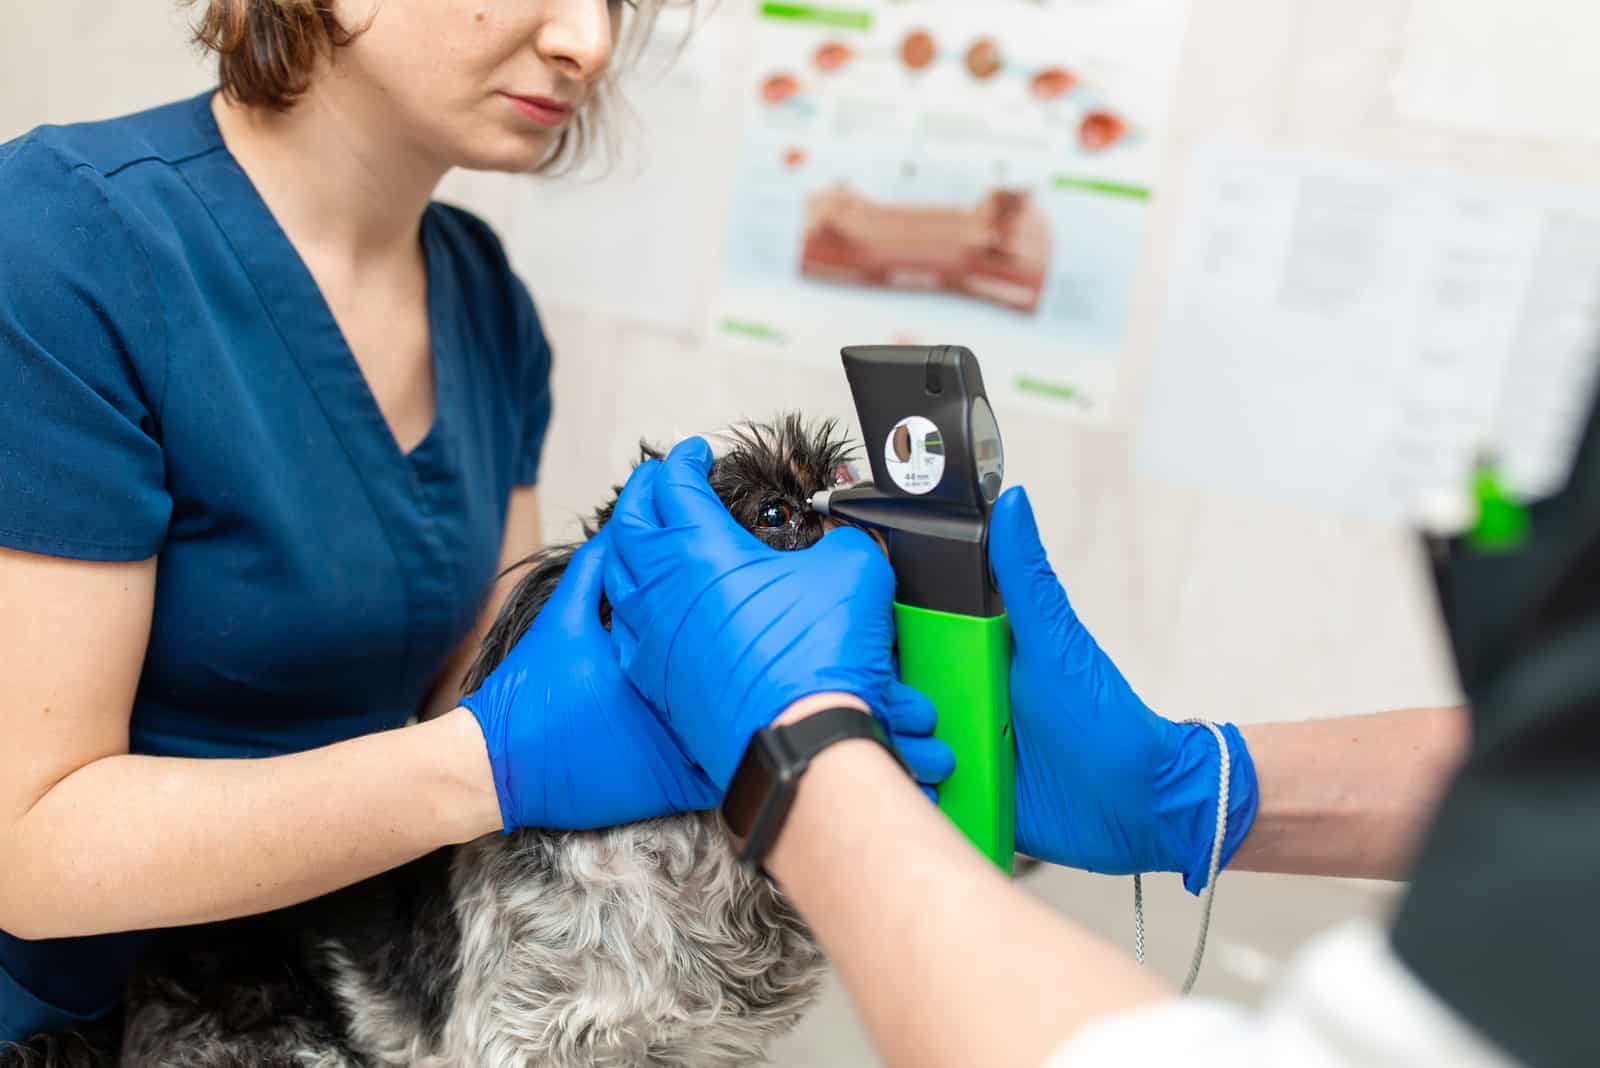 A veterinary ophthalmologist makes a medical procedure